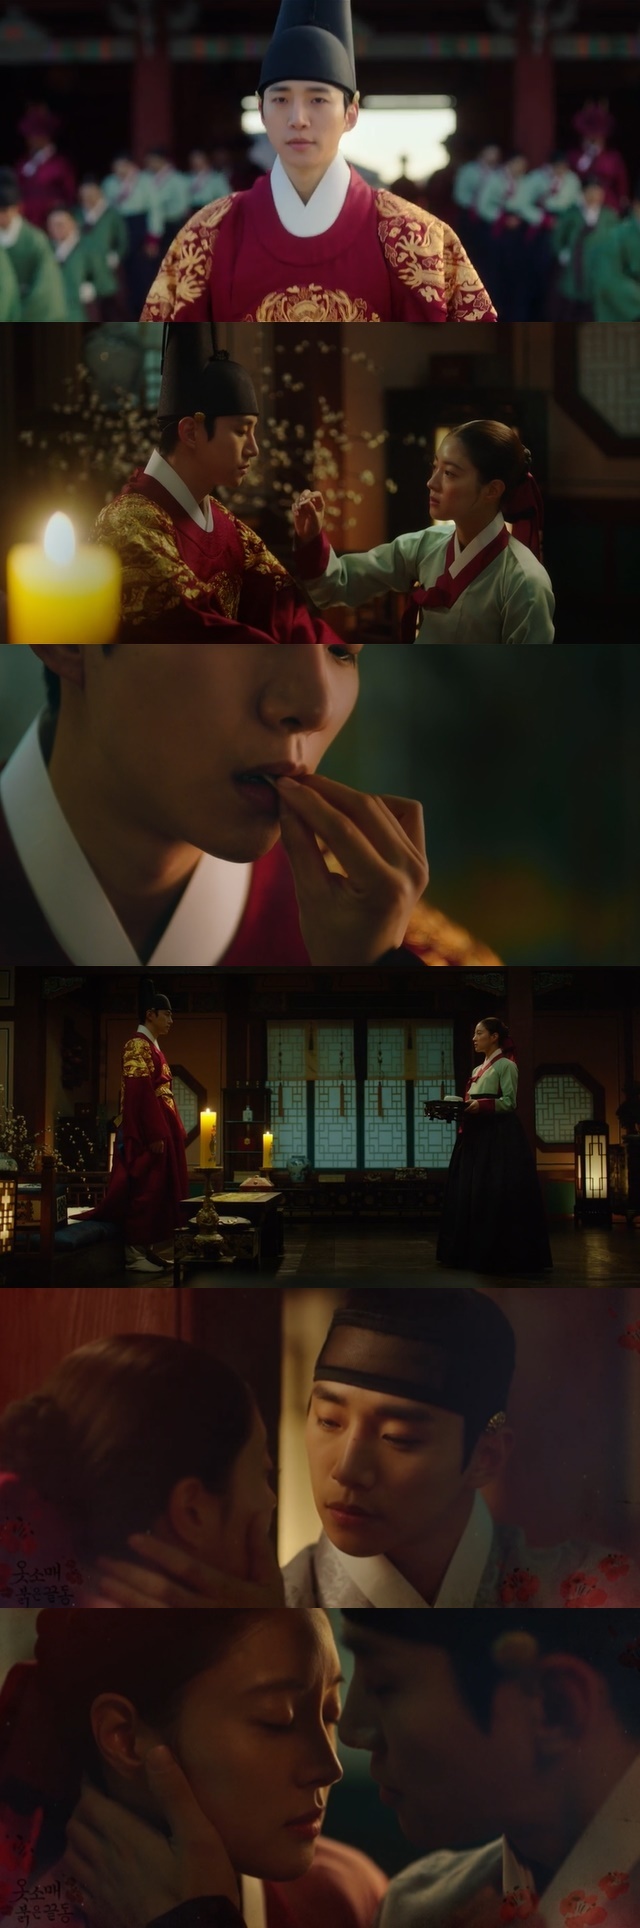 Lee Joon-ho, who was crowned king, offered Lee Se-young a concubine proposal to be a family, and in the trailer, two kissing gods appeared and excited.In the 12th MBC gilt drama The Red Sleeve (playplayplay by Jeong Hae-ri / directed by Jung Ji-in and Song Yeon-hwa), which was broadcast on December 18, Lee Joon-ho (played by Lee Joon-ho) rose to Wang Yu over political adversity.On this day, Sung Duk-im (Lee Se-young) contributed greatly to the separation of the mountain.Seong Duk-im recalled the memory of Golden Governor (a document that tells the future) to Yeongjo in the situation where Yeongjo (Lee Duk-hwa) is not fully mentally ill due to the symptoms of illness (dementia) and Lee San is framed as a stationary party, and with Jung Jeon Kim (Jang Hee-jin) in his book.Yeongjo found the governor of the gold lamp, which was written in a handwritten letter with the apostle taxpayer on the day when the breath of the apostle taxpayer (Do Sang-woo) was cut off in the coming year, and decided to take the position.Yeongjo called Hwawan Ongju (Seo Hyo-rim) as a side war and sent the seal directly to the mountain with the hands of Hwawan Ongju.Here, Ankuksa, who was dispatched by Yeongjo to dig up the incident, also returned.Youngjo, who learned that the reverse of Gwanghan Palace for the separated mountain was true, nevertheless gave him the opportunity to leave the palace forgiving the manufacturing palace Cho (Park Ji-young).But the manufacturing palace Cho eventually chose to volunteer: Manufacturing palace Cho had a very bitter end, like any Maybe she.Yeongjo closed his eyes in the arms of Isan. Yeongjo left two wills to Isan after bite everyone.The words left as kings were to know and endure the fate of taking someones life, and to leave as a grandfather was to forgive what he had done wrong.Yeongjo ascended, leaving the last words, Sanah, now you are Wang Yu of Joseon.After Iacid silver, he was safely crowned king. Iacid silver was busy taking care of the day, and I did not care more about the virtue than before.Still, with the still-spirited year for the Acid silver castle, Sungdeok only treated it as a special among Maybe she.I also proposed to Sung Duk-im, who was in his own market.I think the three years of King Seon have been over and the things to be done after the ascendance are over, and you probably guess what I will say.I want you by my side, not as a Maybe she, but as a woman. So Im asking you to be my concubine.Sung Duk-im accepted it as yes and accepted it.